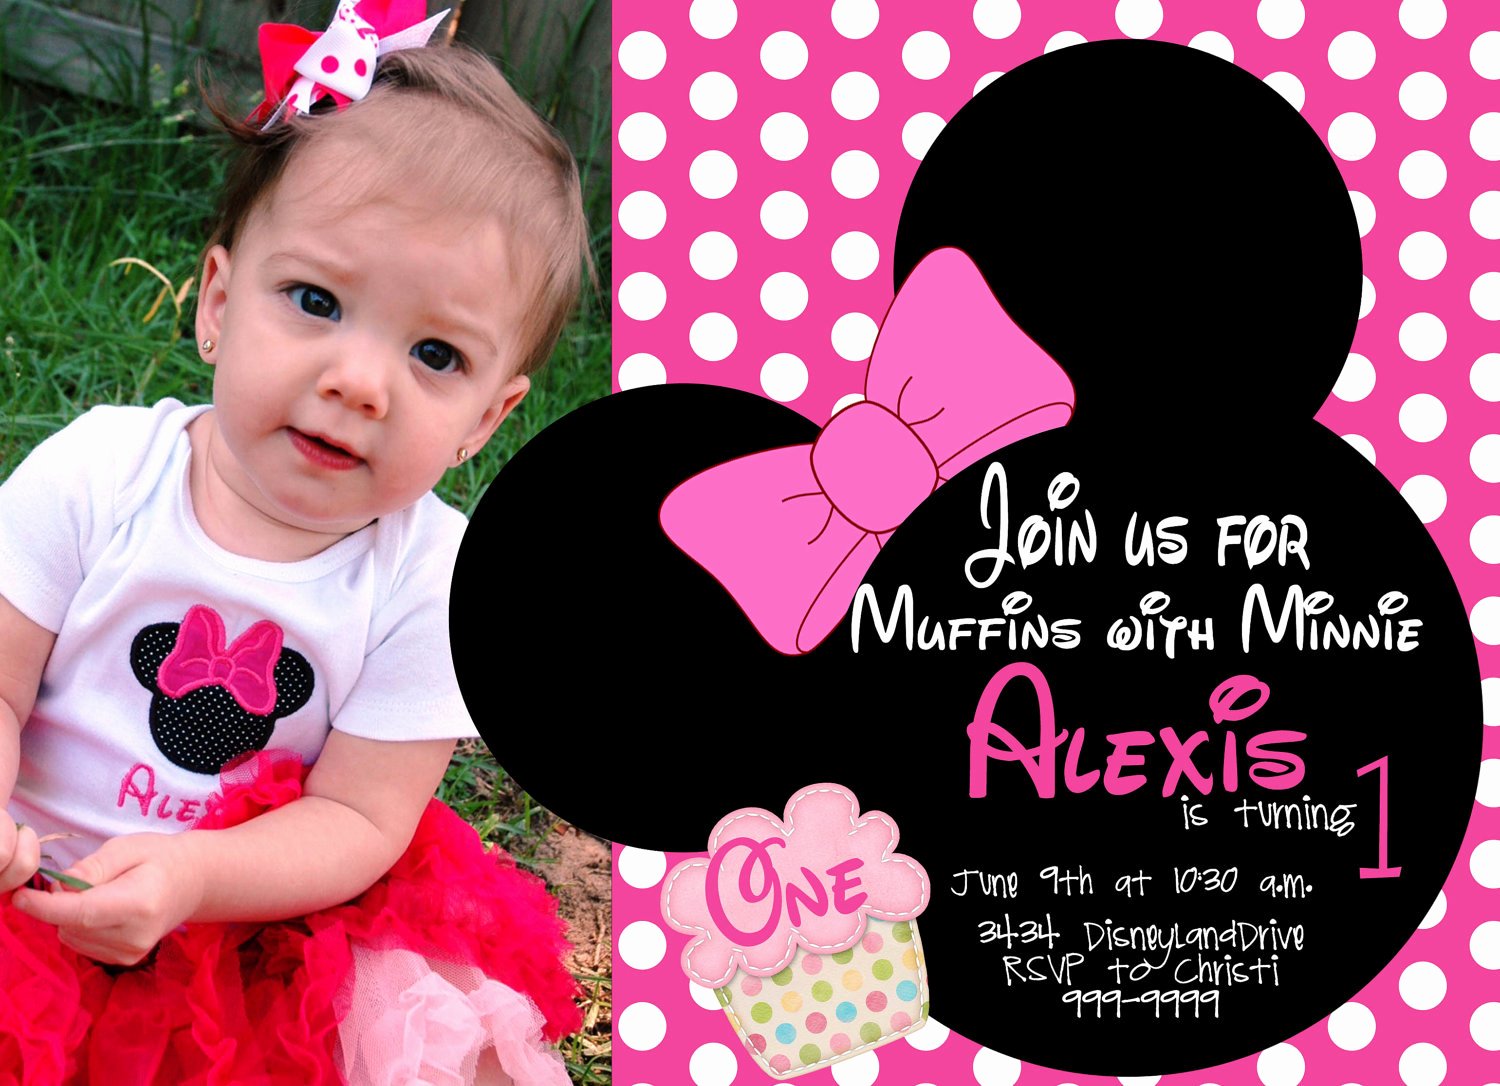 Minnie Mouse Invitation Wording Inspirational Minnie Mouse Birthday Invitation Wording